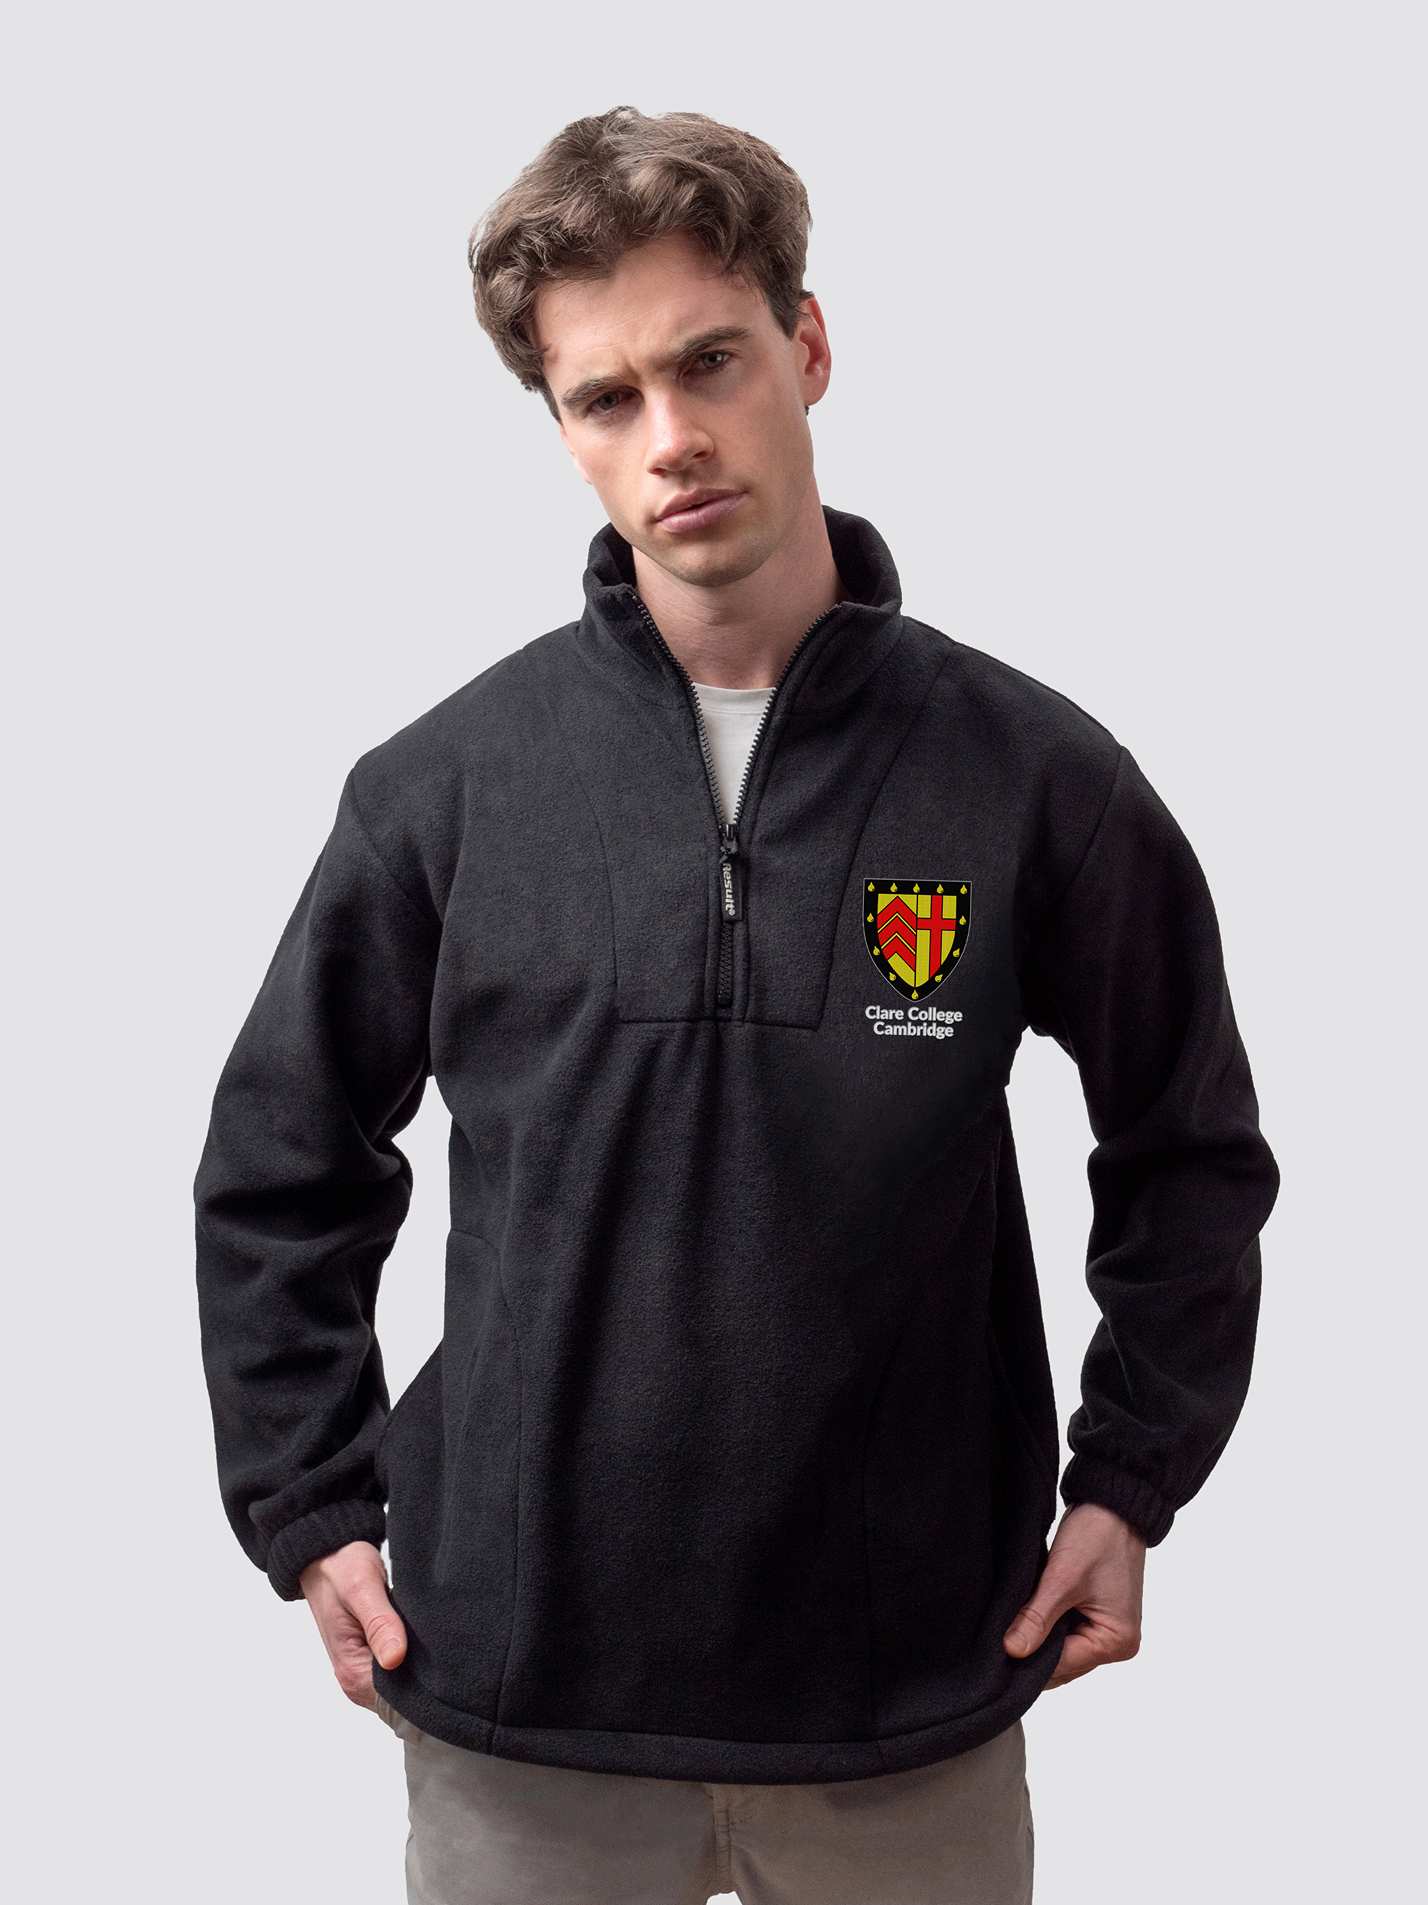 Cambridge University fleece, with custom embroidered initials and Clare crest